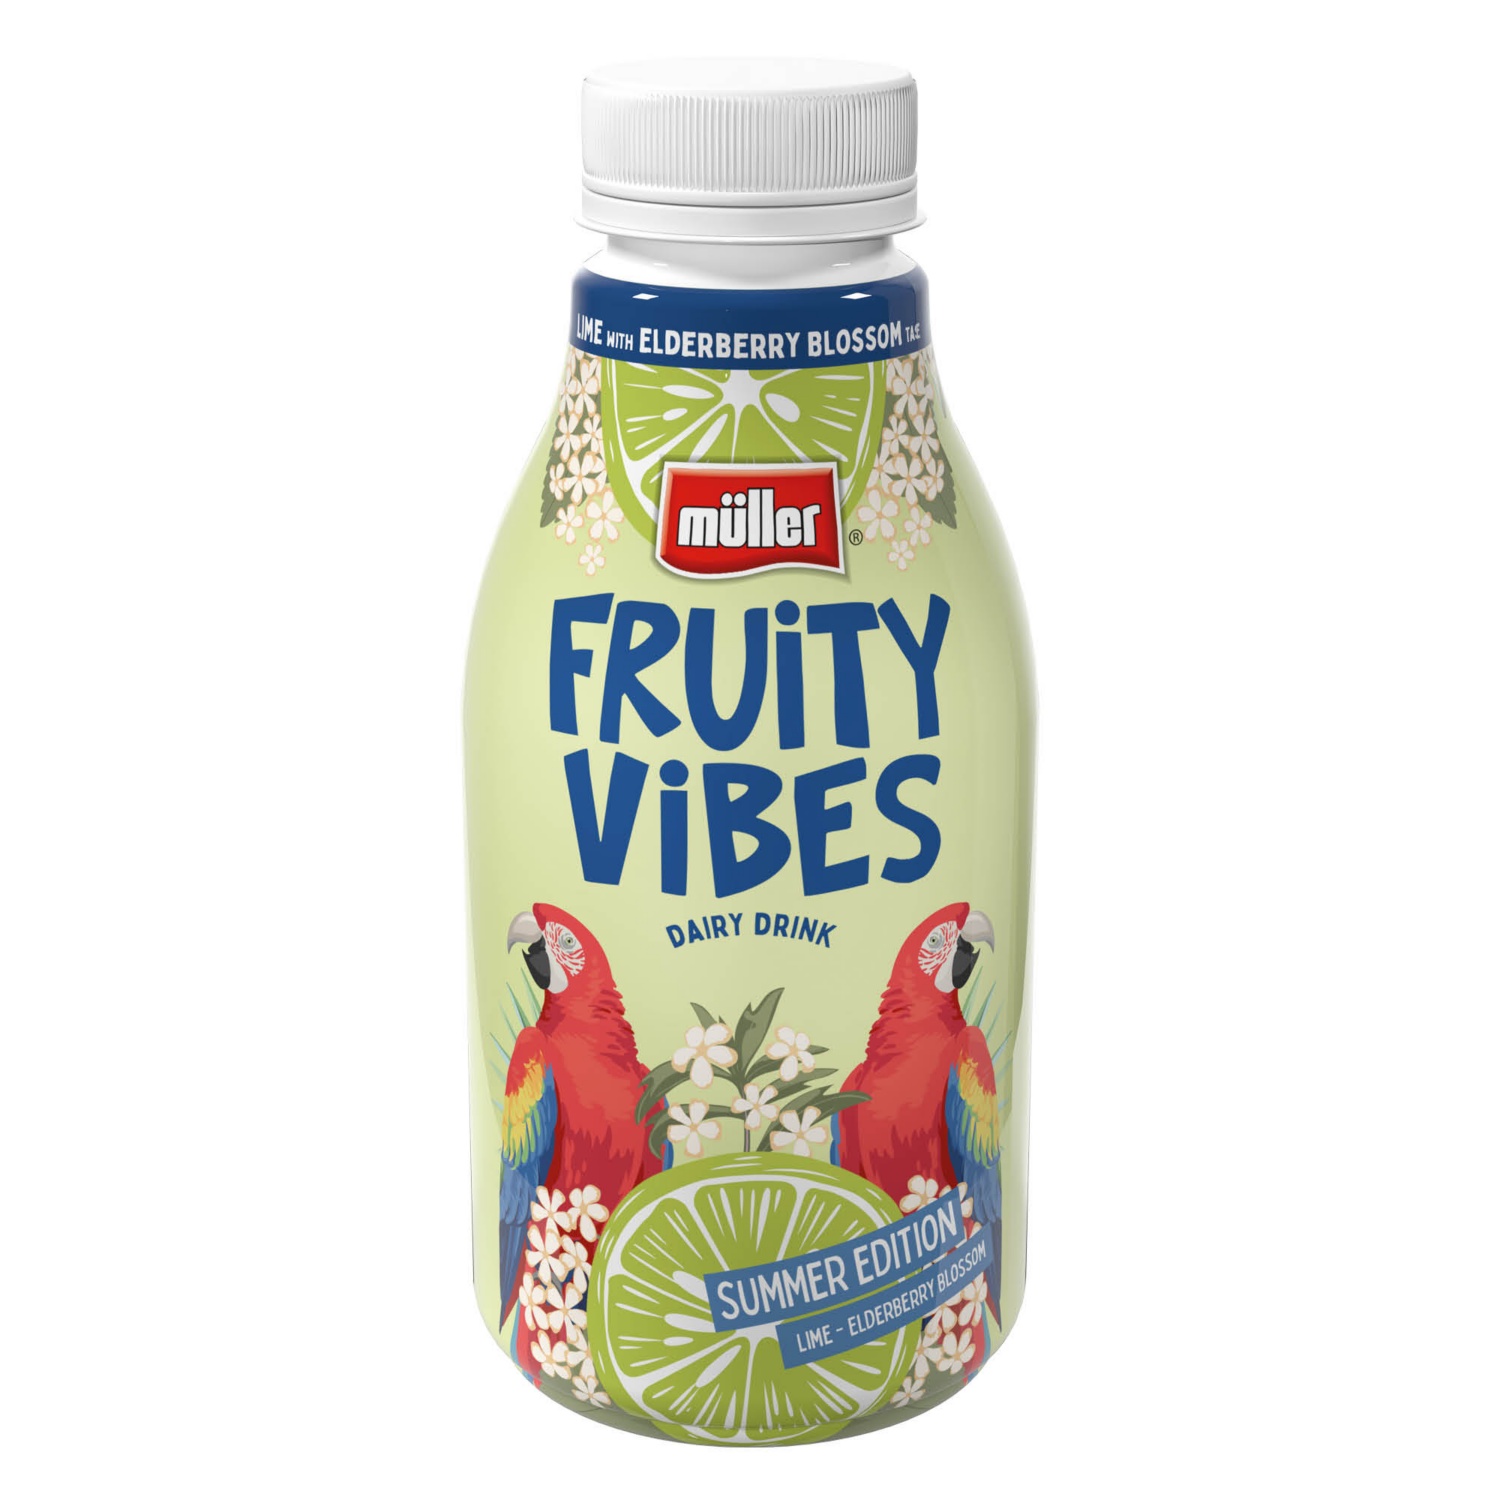 MÜLLER Fruity Vibes, 500 g, lime-bodza